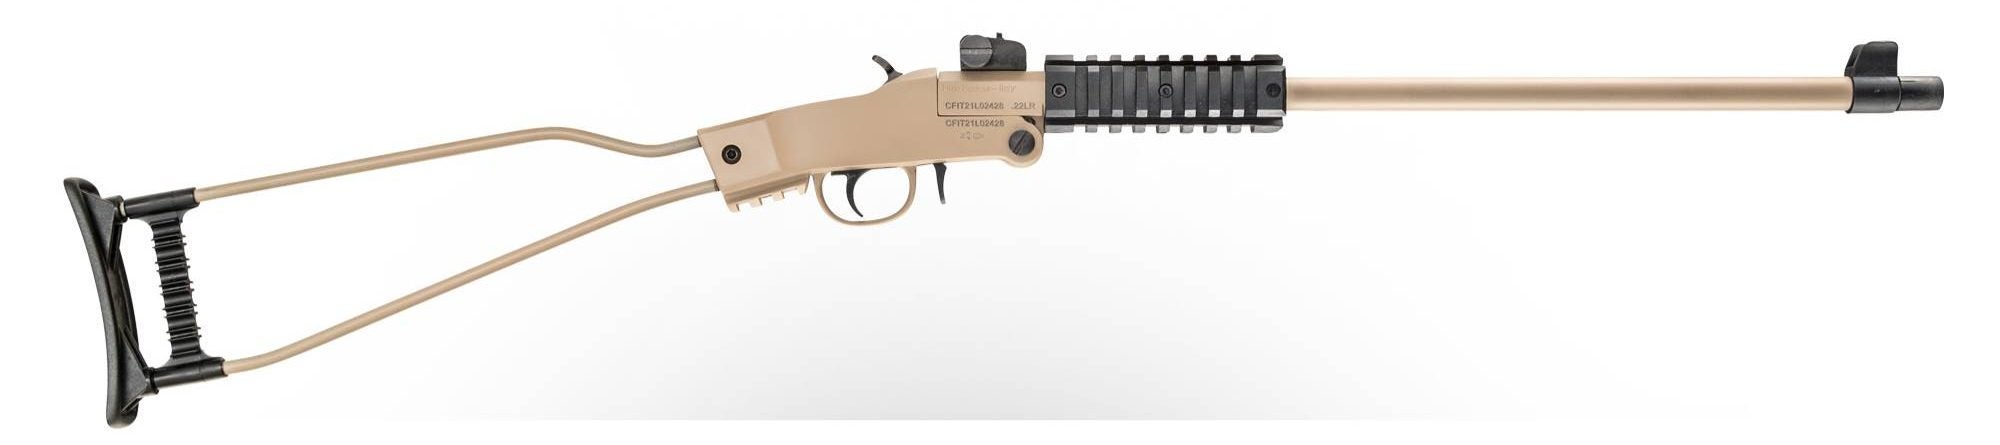 Chiappa's NEW Little Badger Take Down Xtreme Rifle